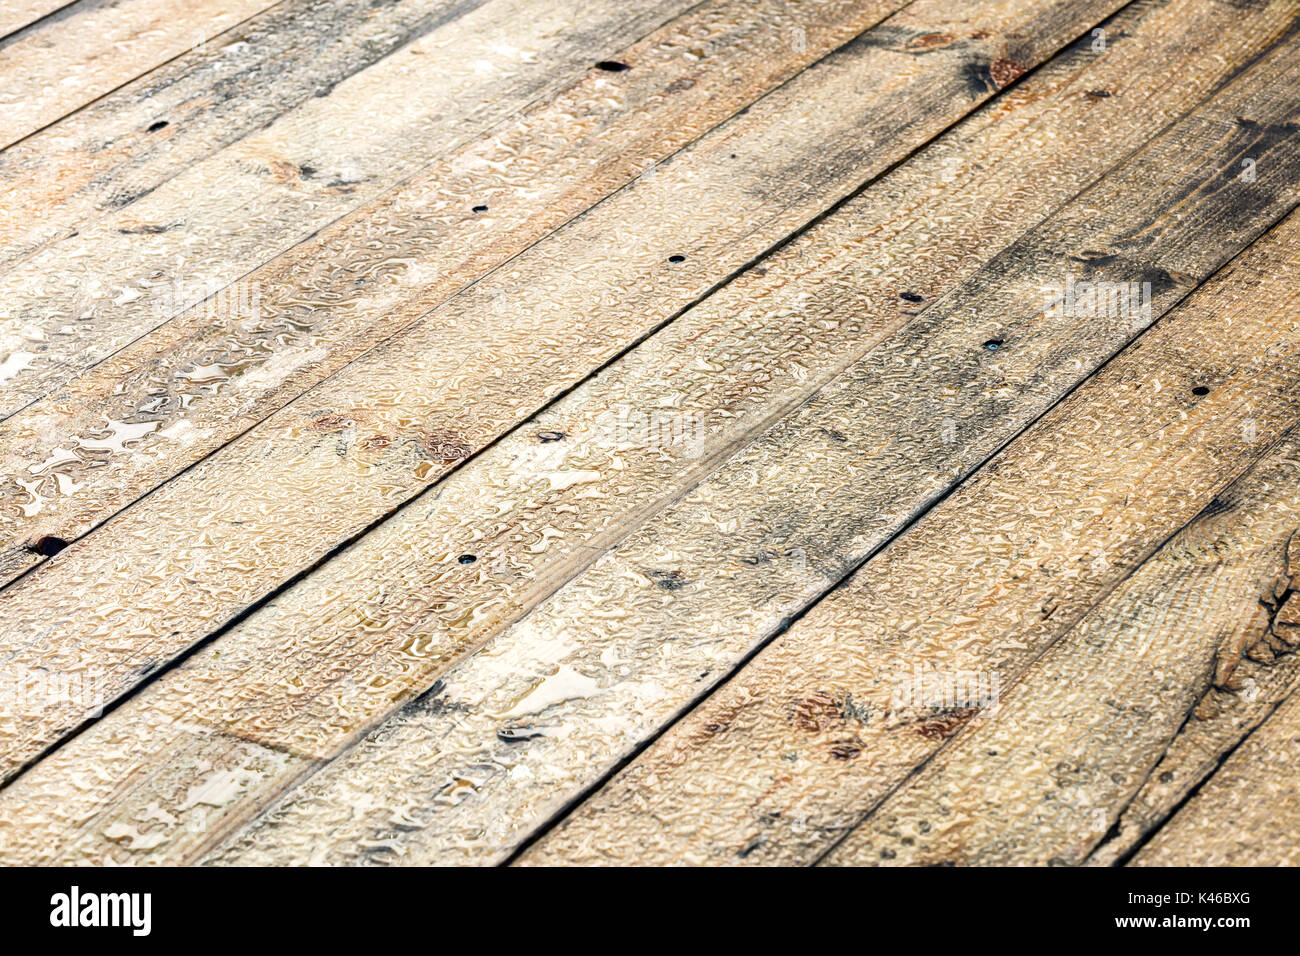 wet cottage deck after summer rain. raindrops on wooden planks. Stock Photo